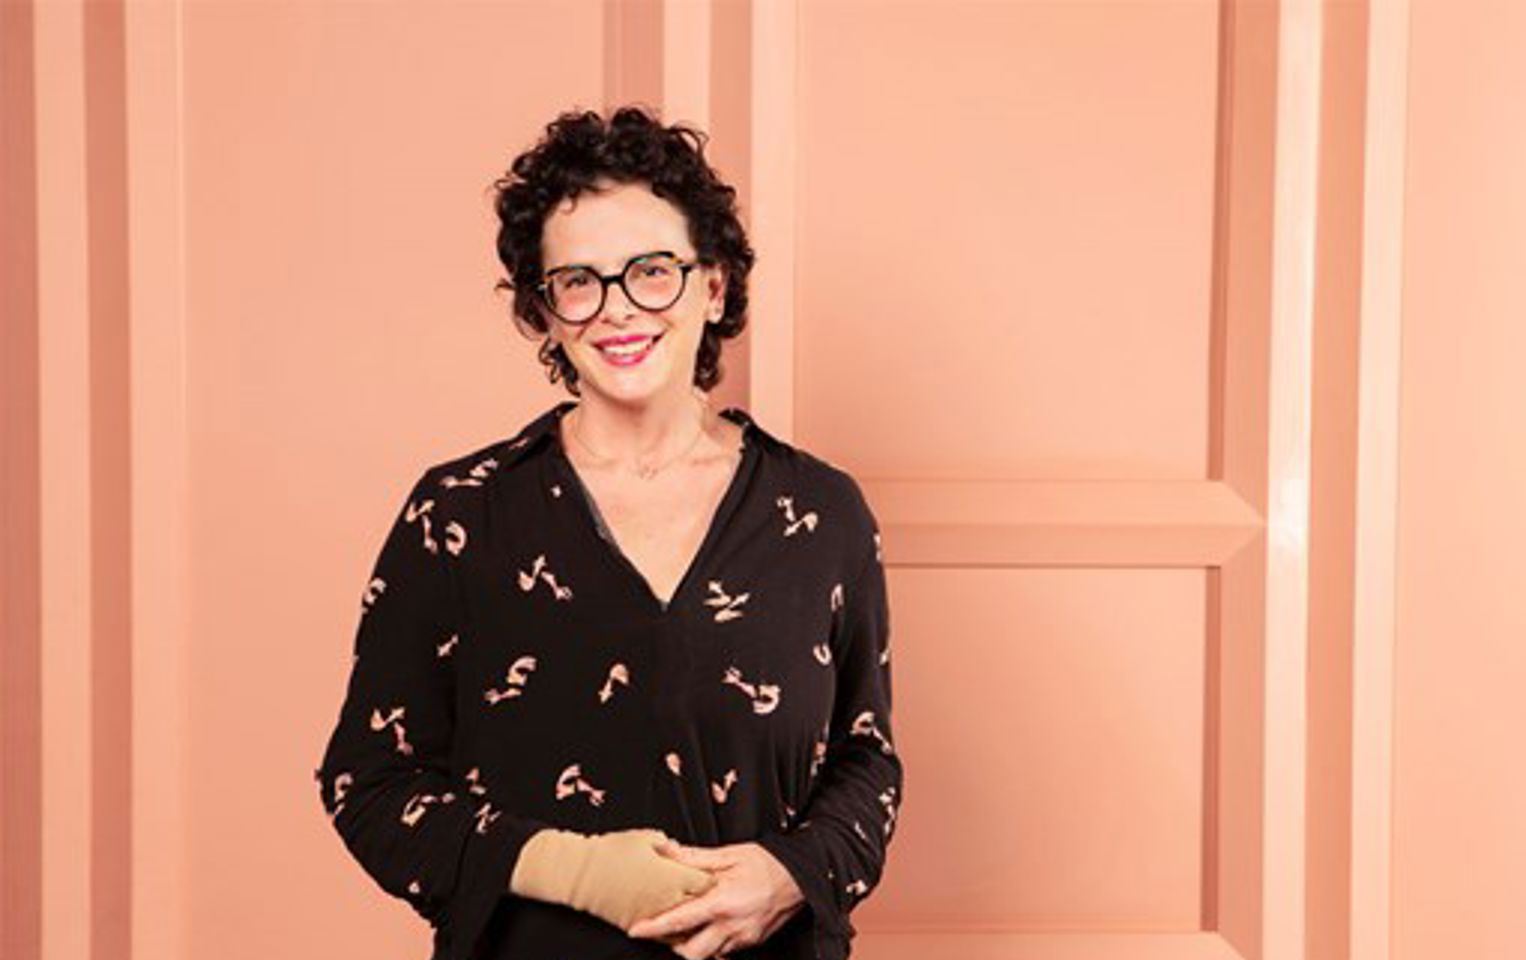 Photo of a smiling woman (Dr Na'ama Carlin) who is wearing glasses and pink lipstick. Her hair is short, dark and curly and she is wearing a dark dress, against a light pink background